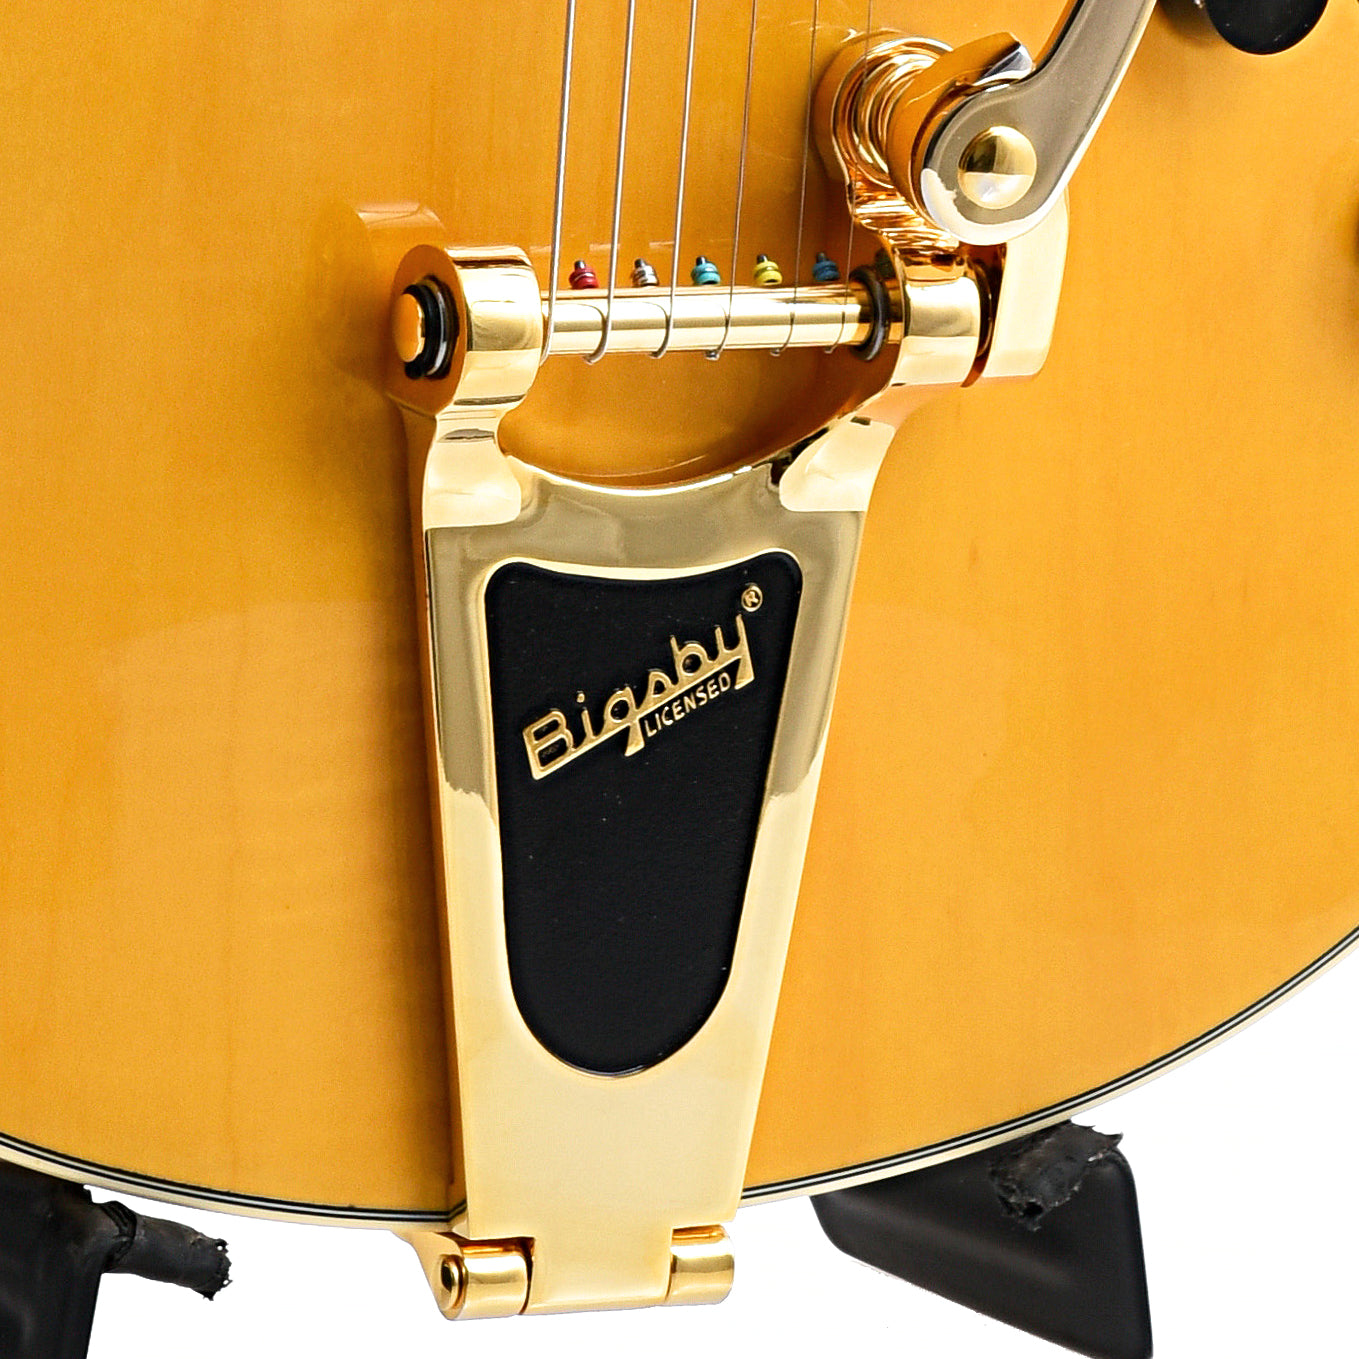 GRETSCH G2410TG Streamliner Hollow Body Single-Cut with Bigsby and Gold  Hardware Village Amber Streamliner